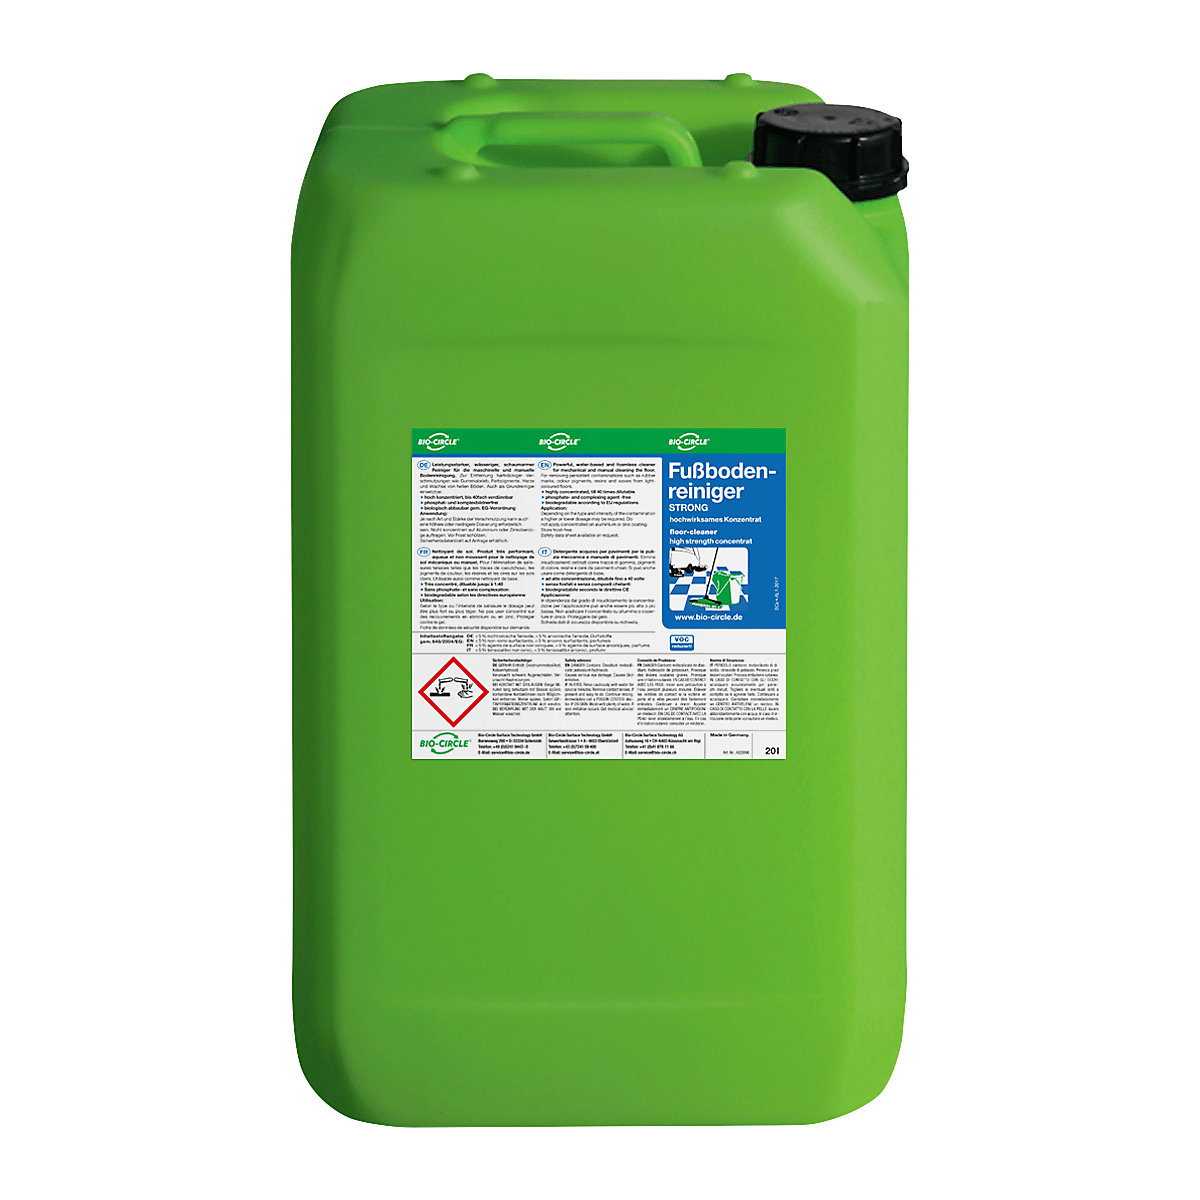 STRONG floor cleaner - Bio-Circle